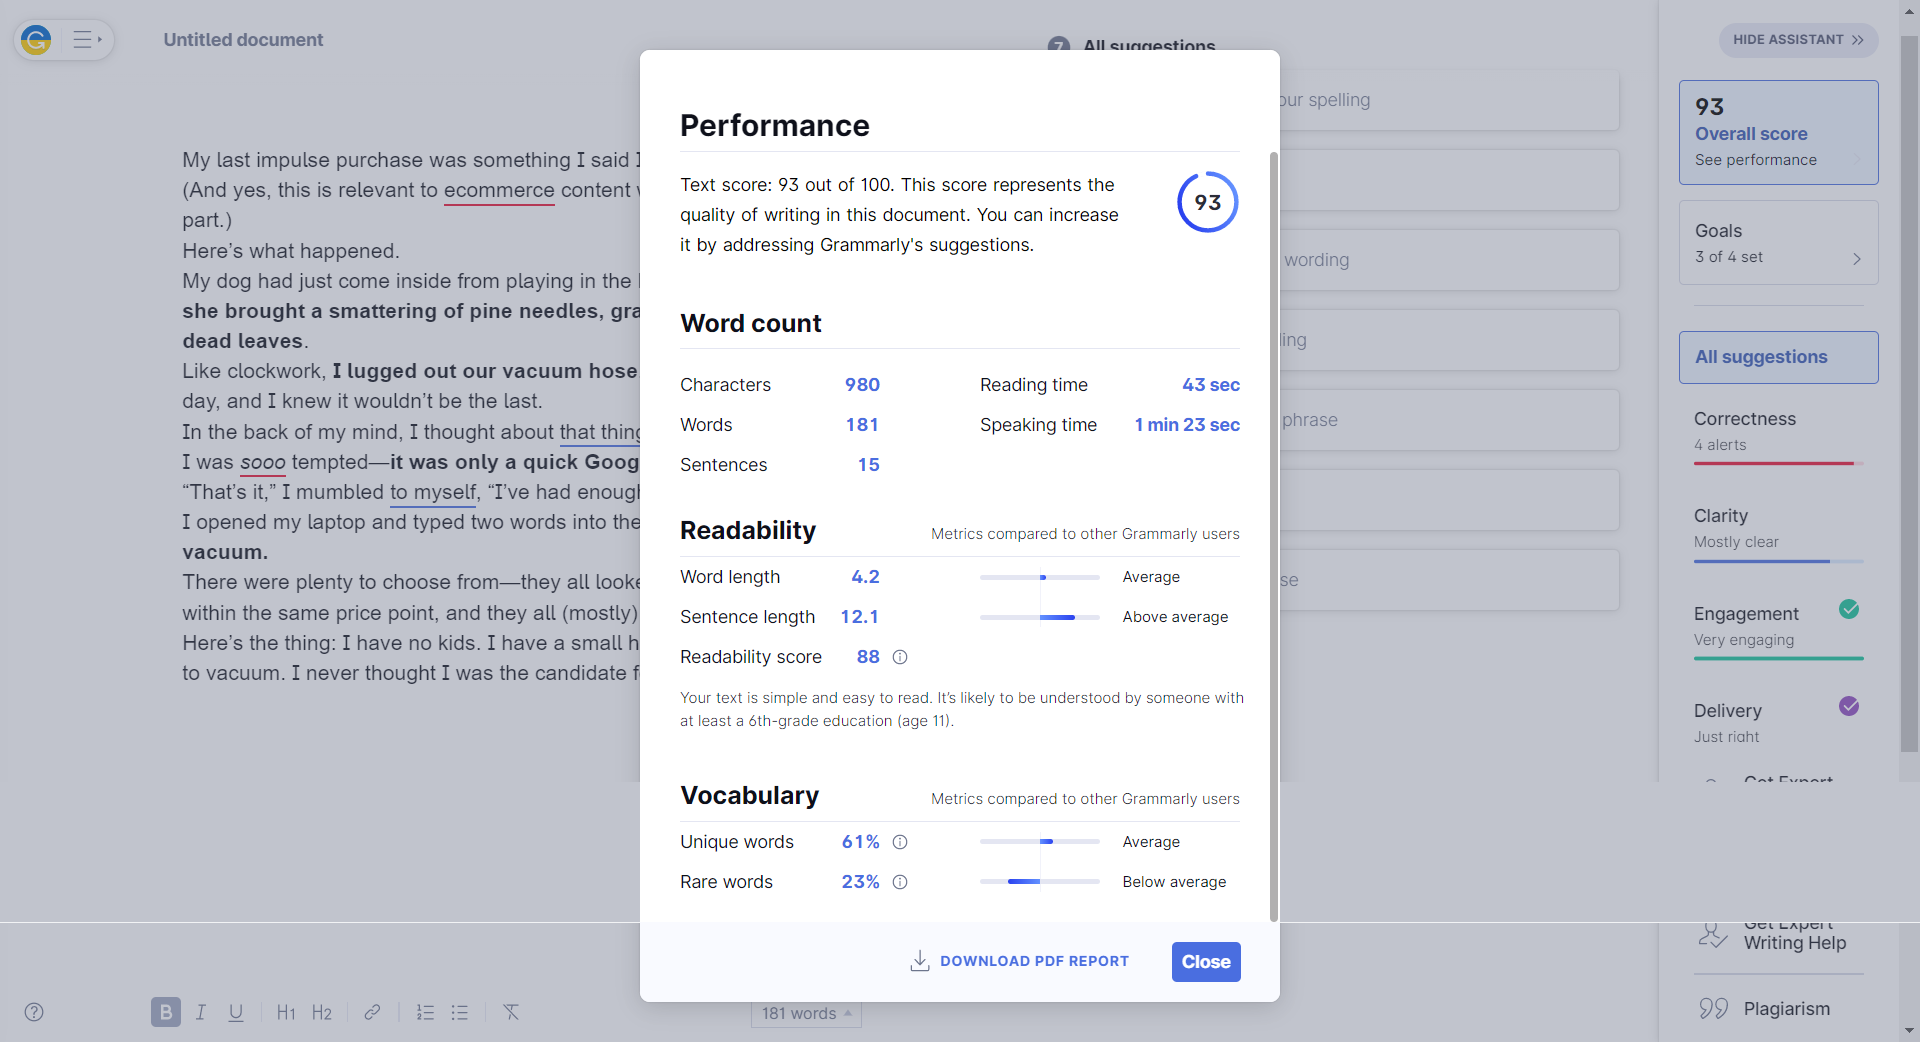 Screenshot of Grammarly's performance report of a passage of text.